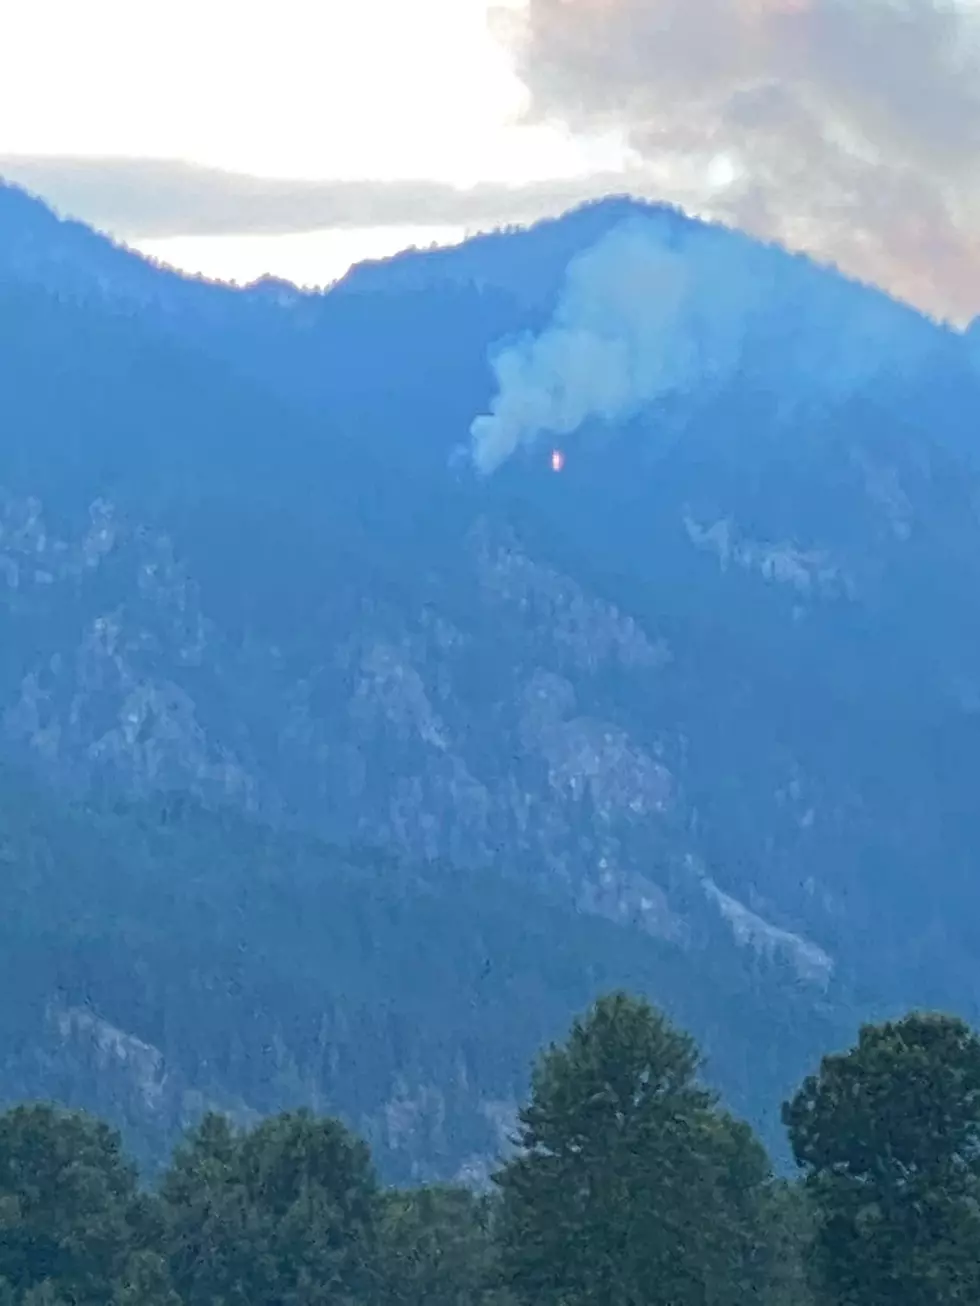 UPDATE: Over 13 Fires Burning in Lake Wenatchee